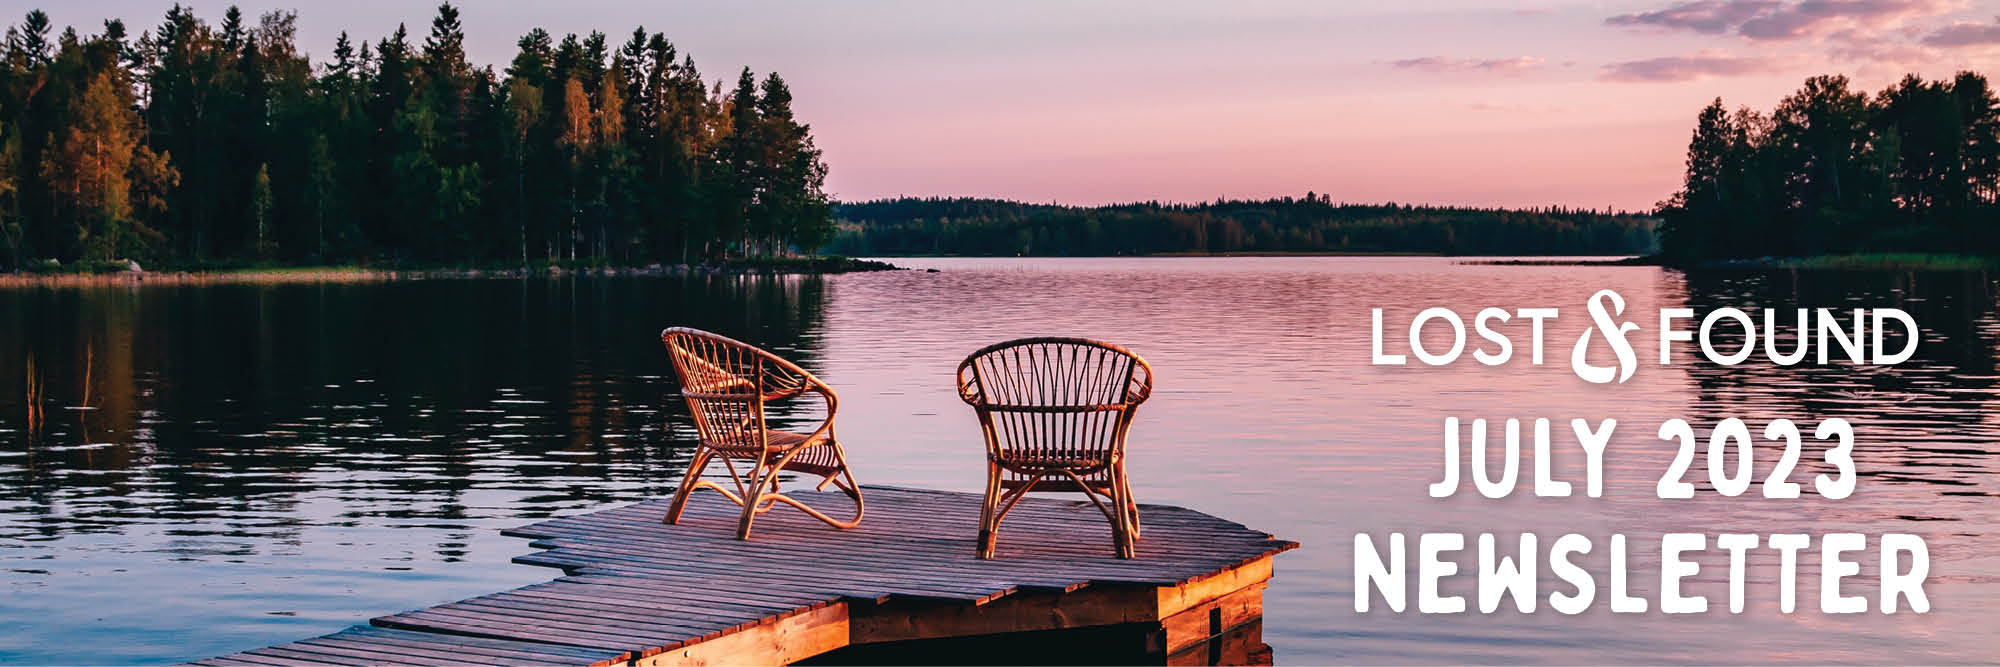 Lost&Found July 2023 Newsletter – dock on lake with two wicker chairs